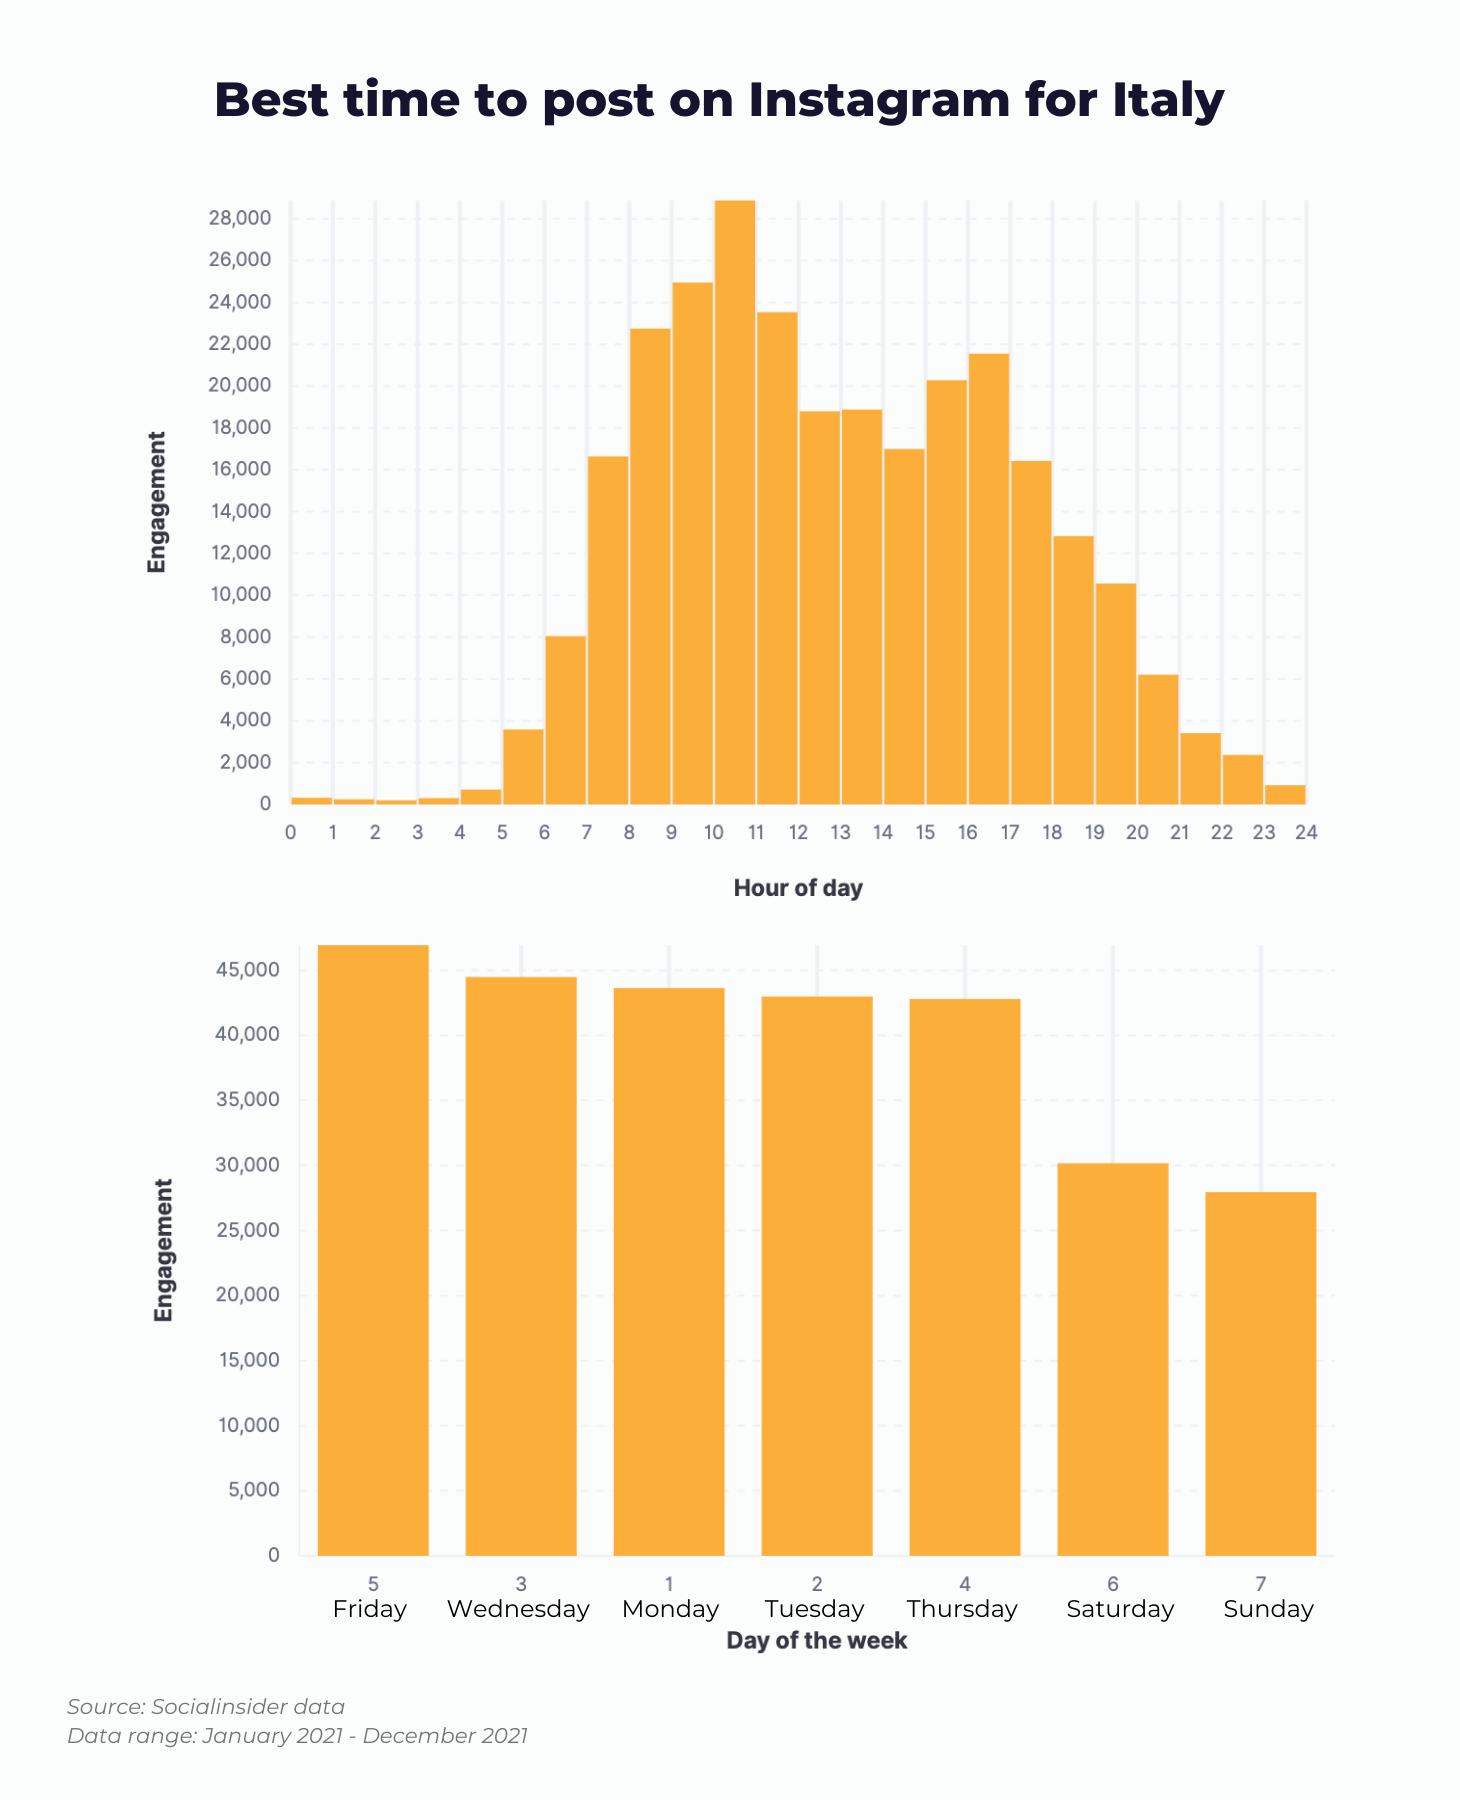 Here is a chart showing what data tells about the best time to post on Instagram for Italy.